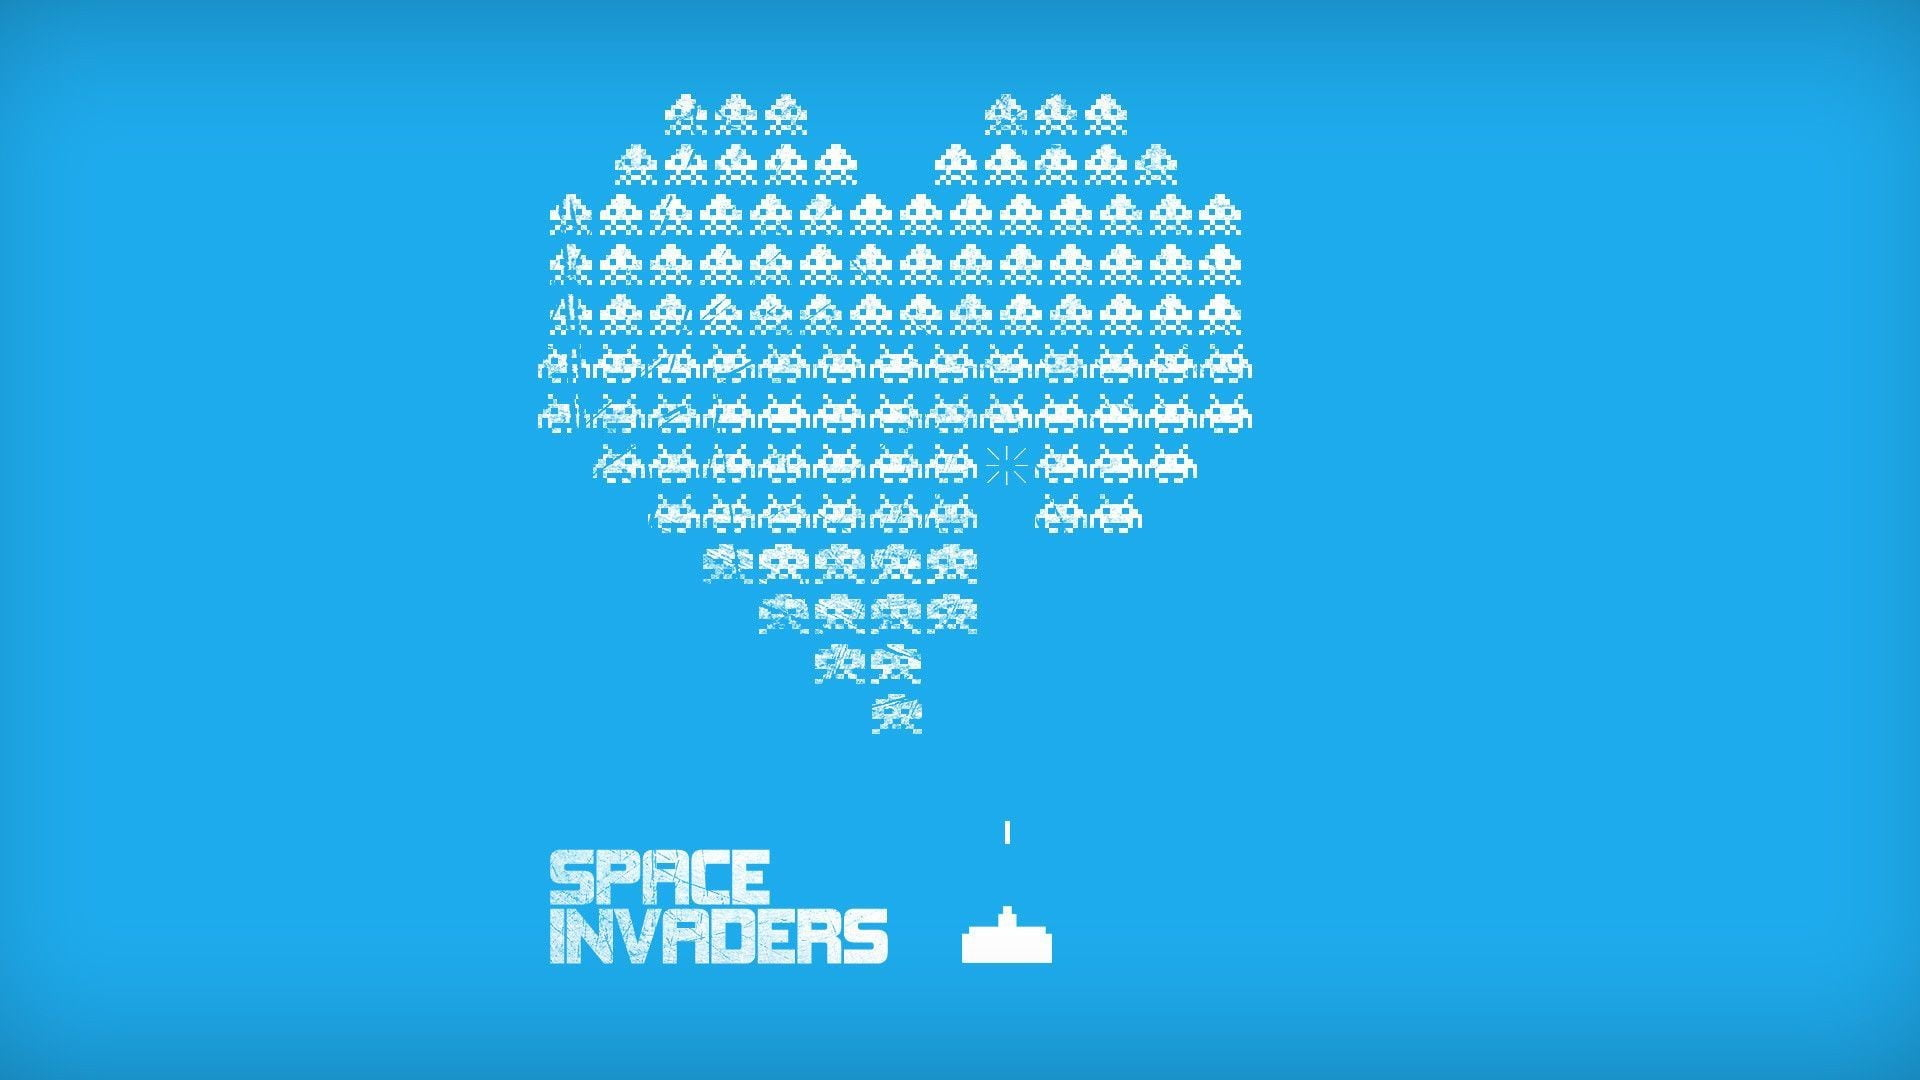 1920x1080 Space Invaders cover, blue background, retro games, Space Invaders, video games HD wallpaper